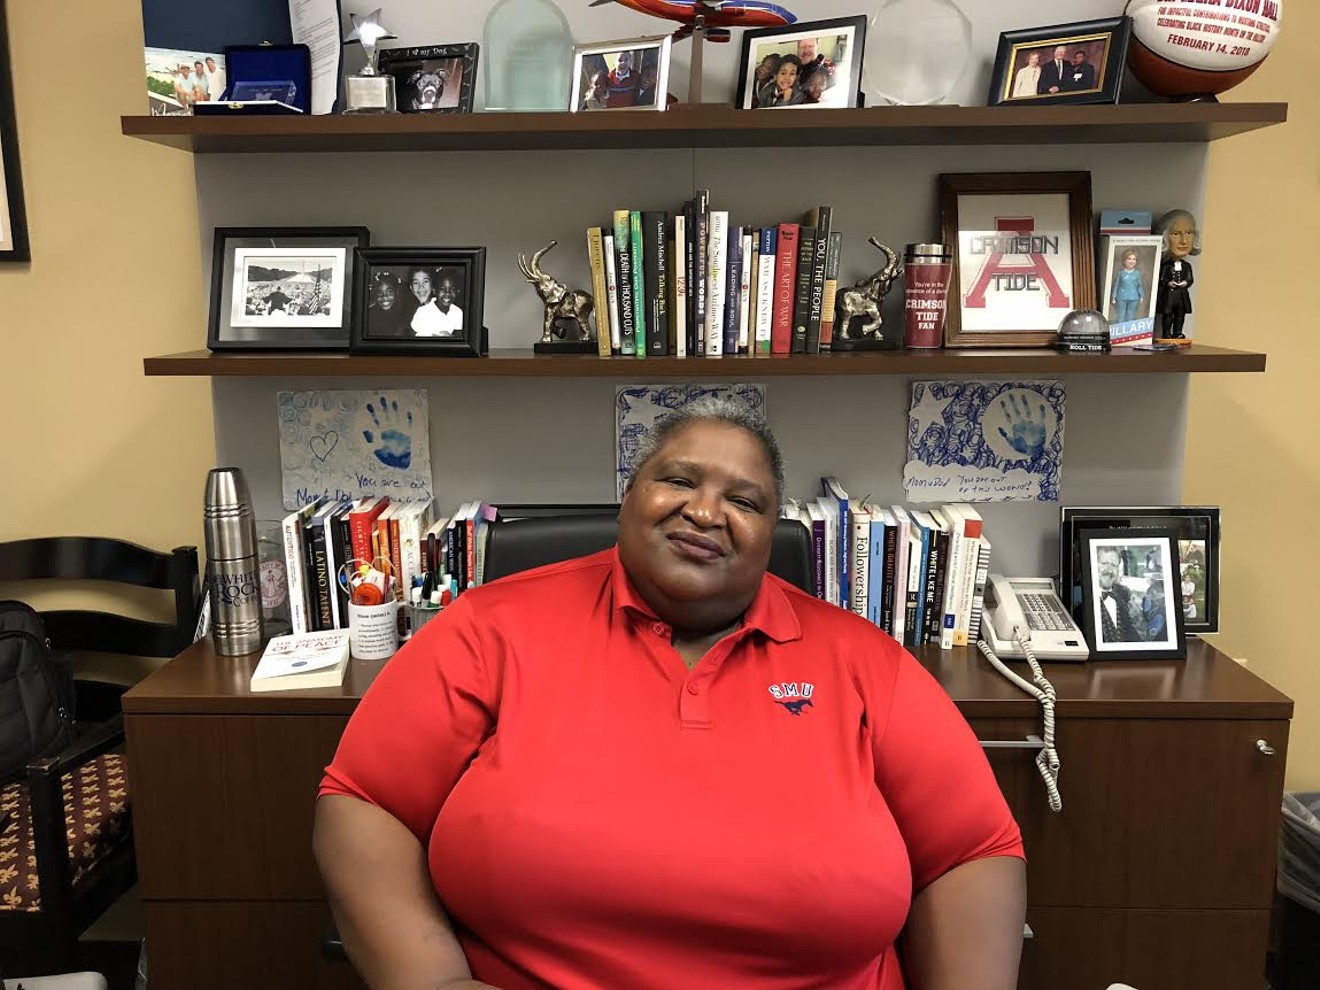 This is Dr. Maria Dixon-Hall, a senior adviser to SMU's provost, and the person responsible for the controversial survey that made headlines around the country.